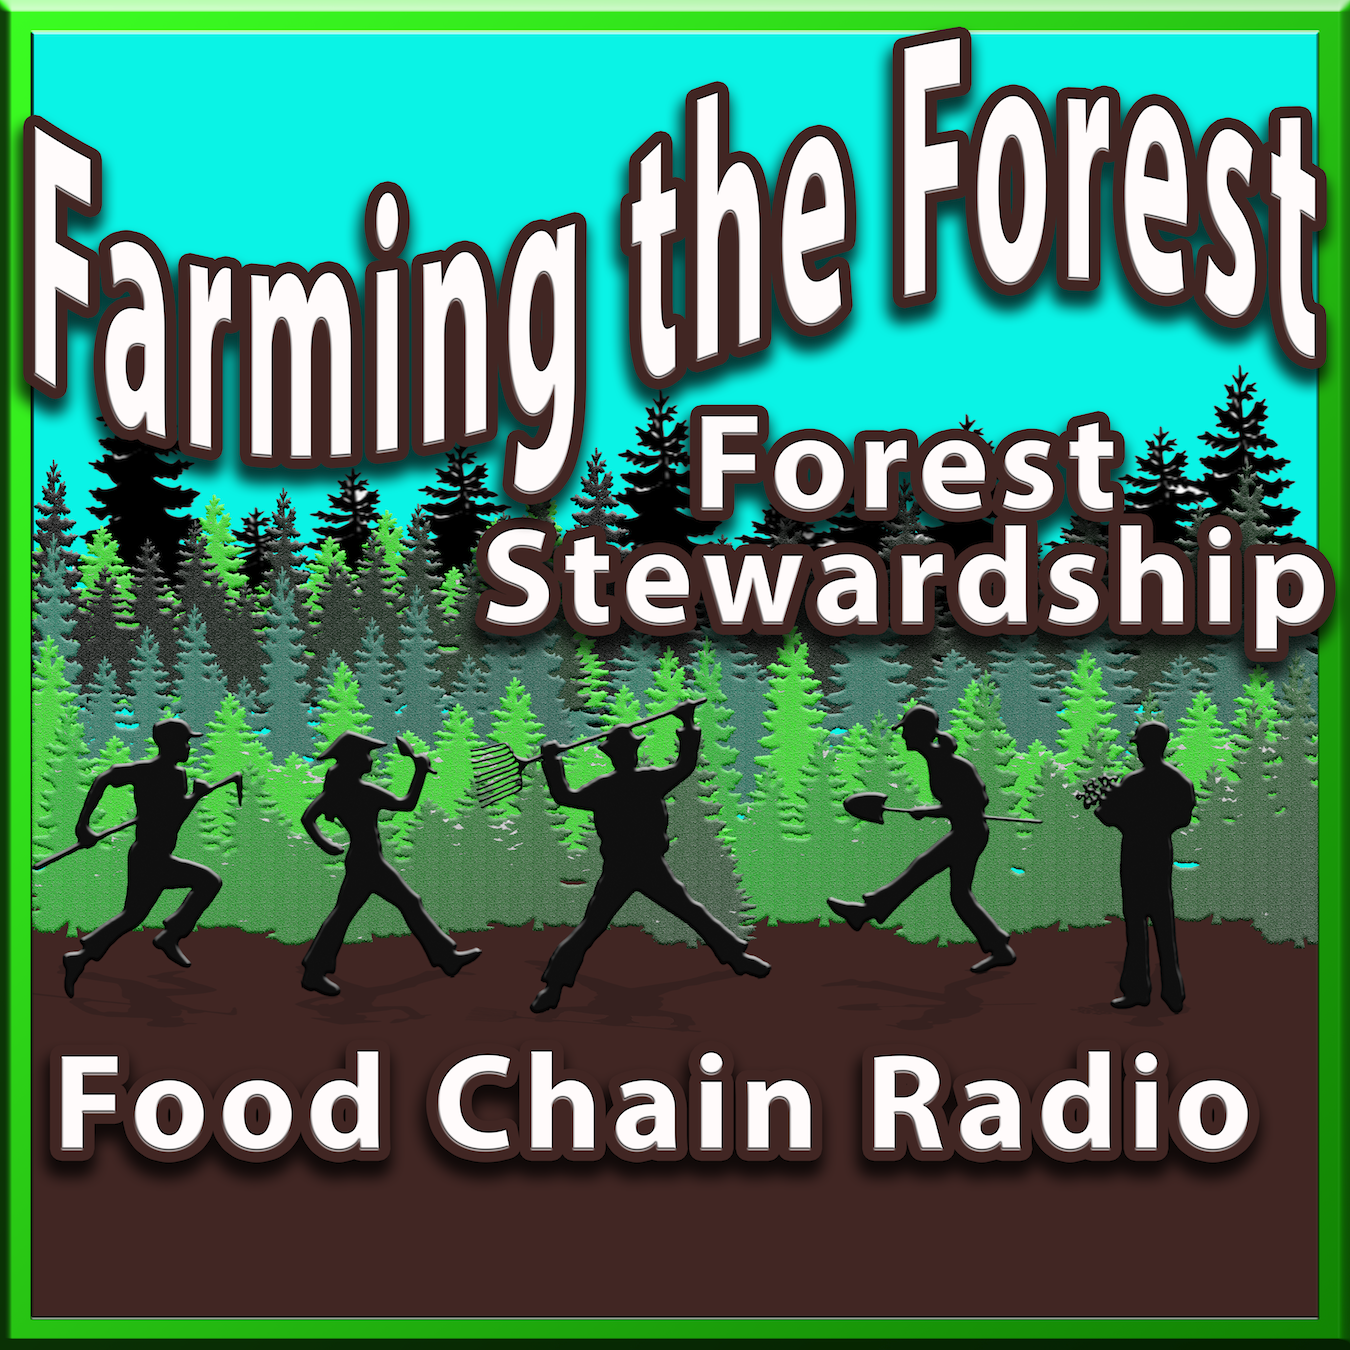 Michael Olson Food Chain Radio - Farming the Forest and Forest Stewardship